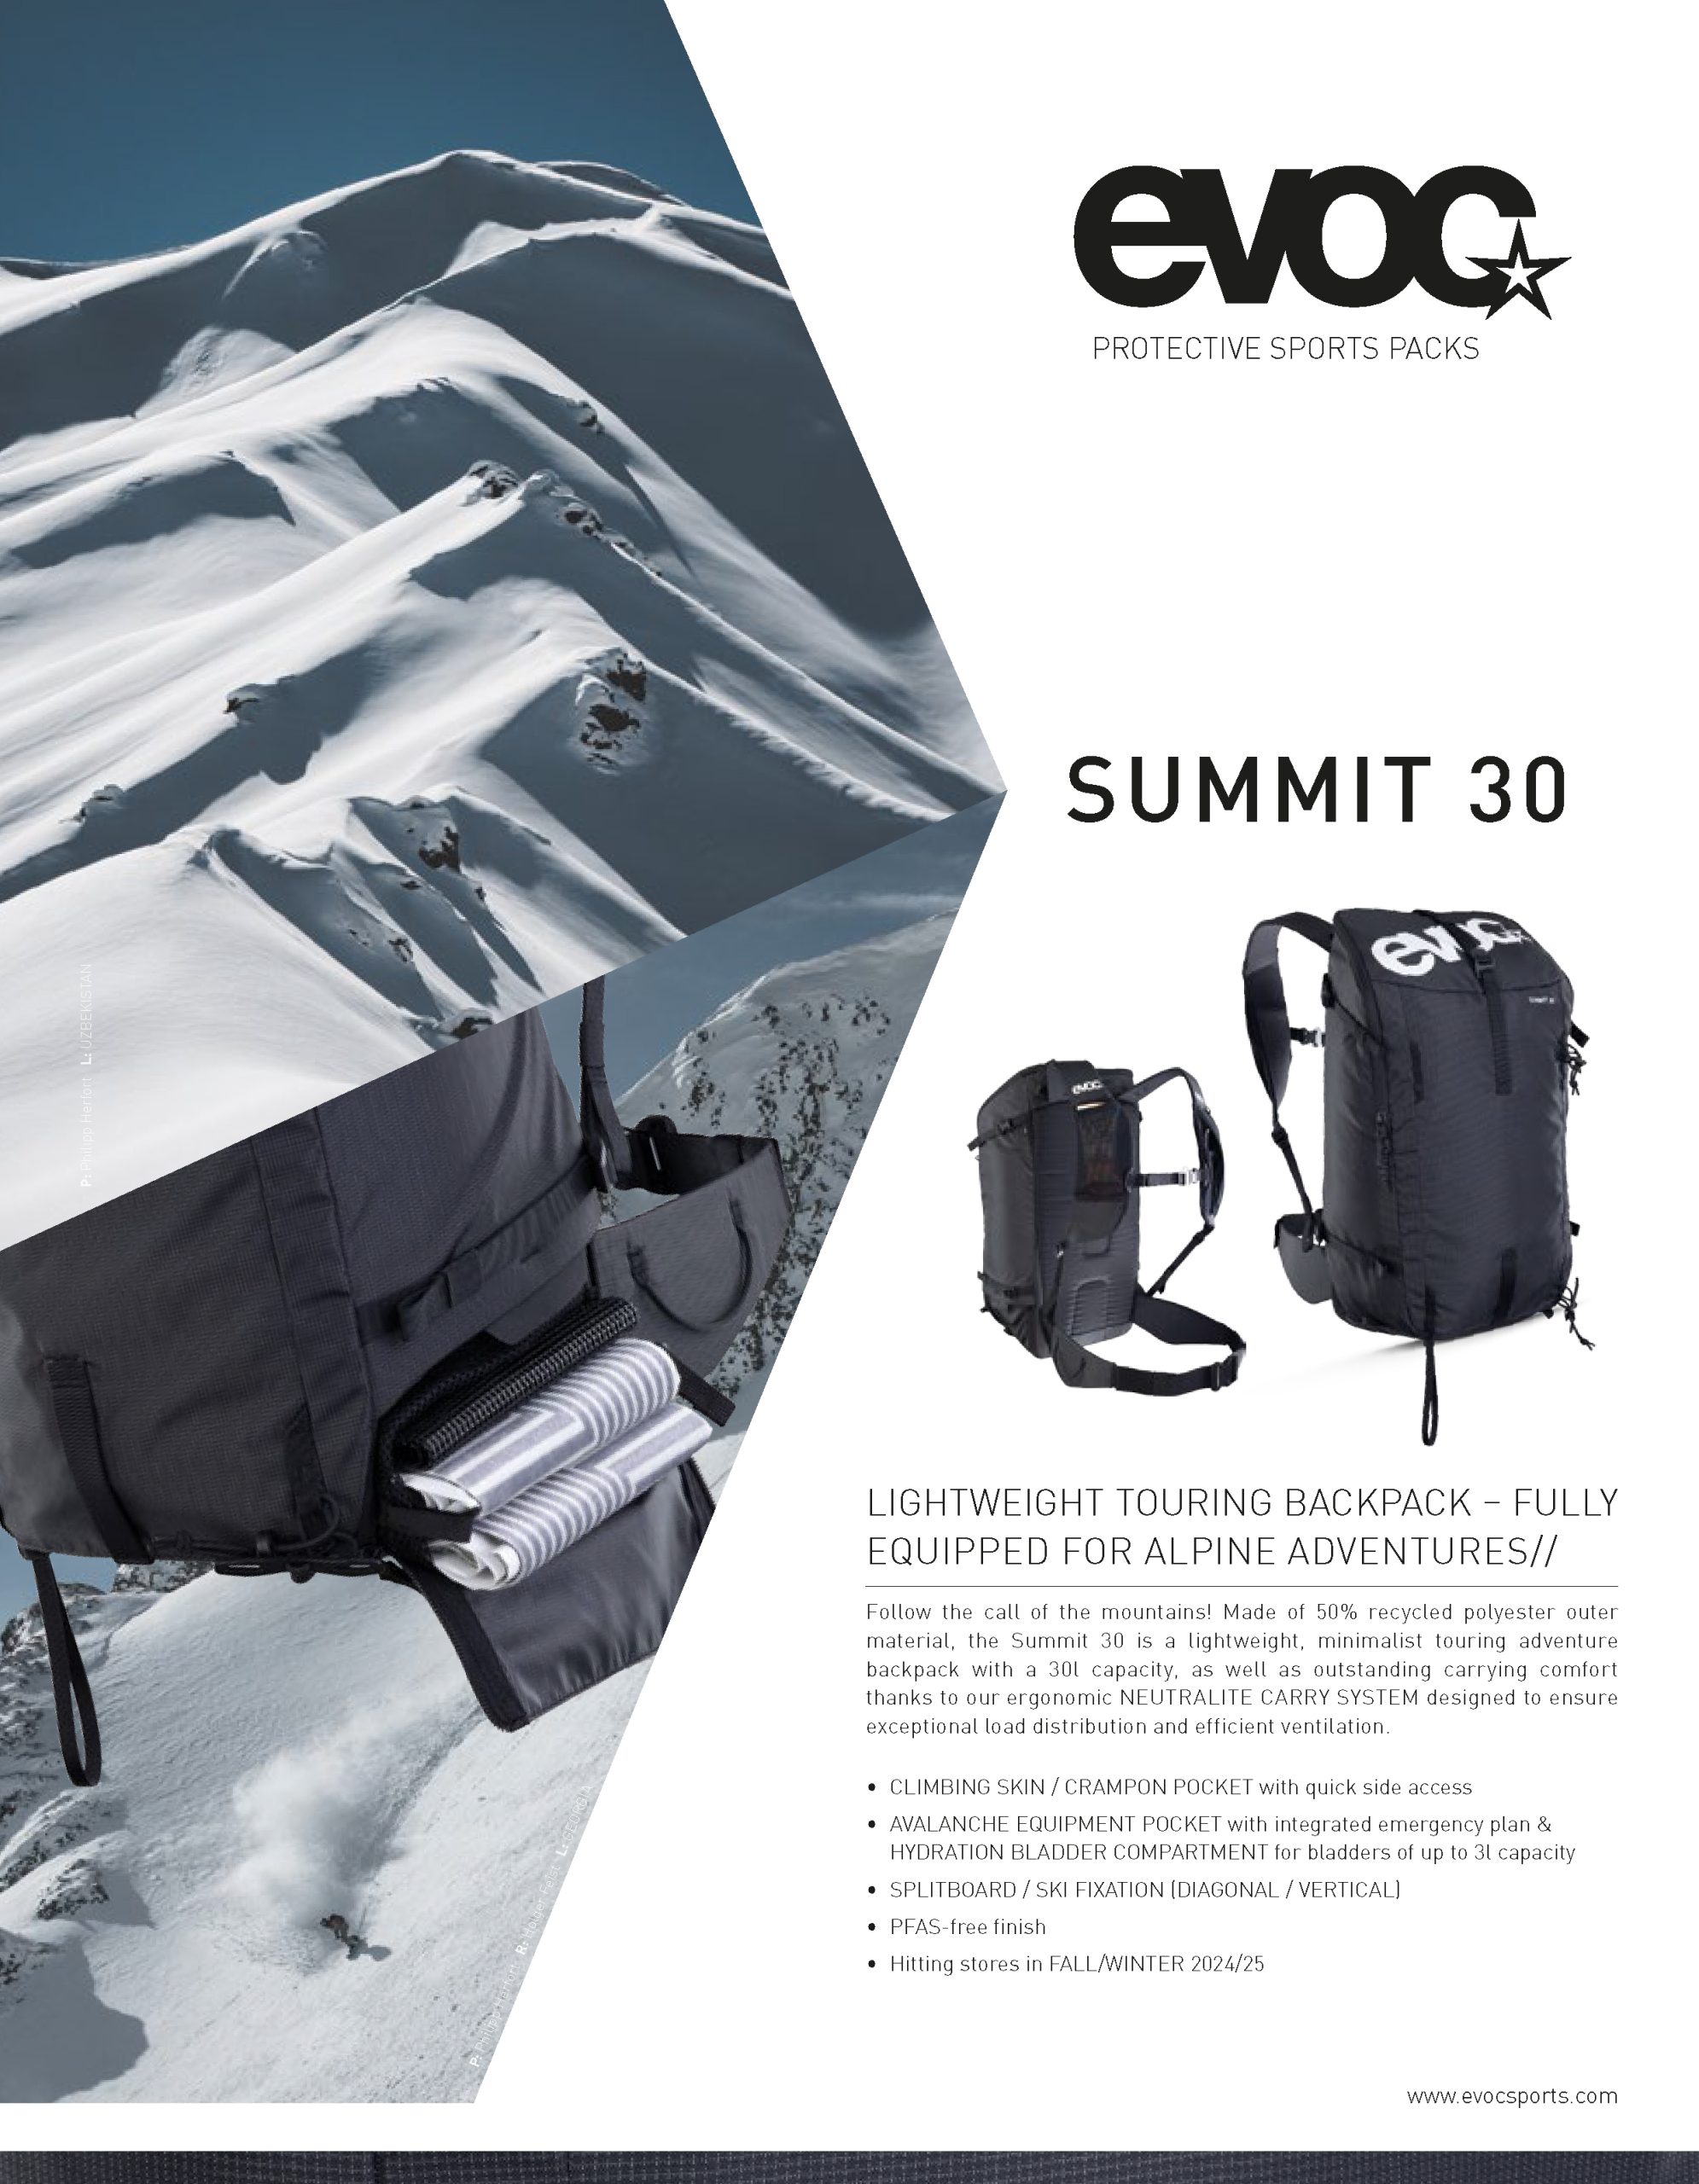 118 Evoc Technical Backpack and Snow Protection